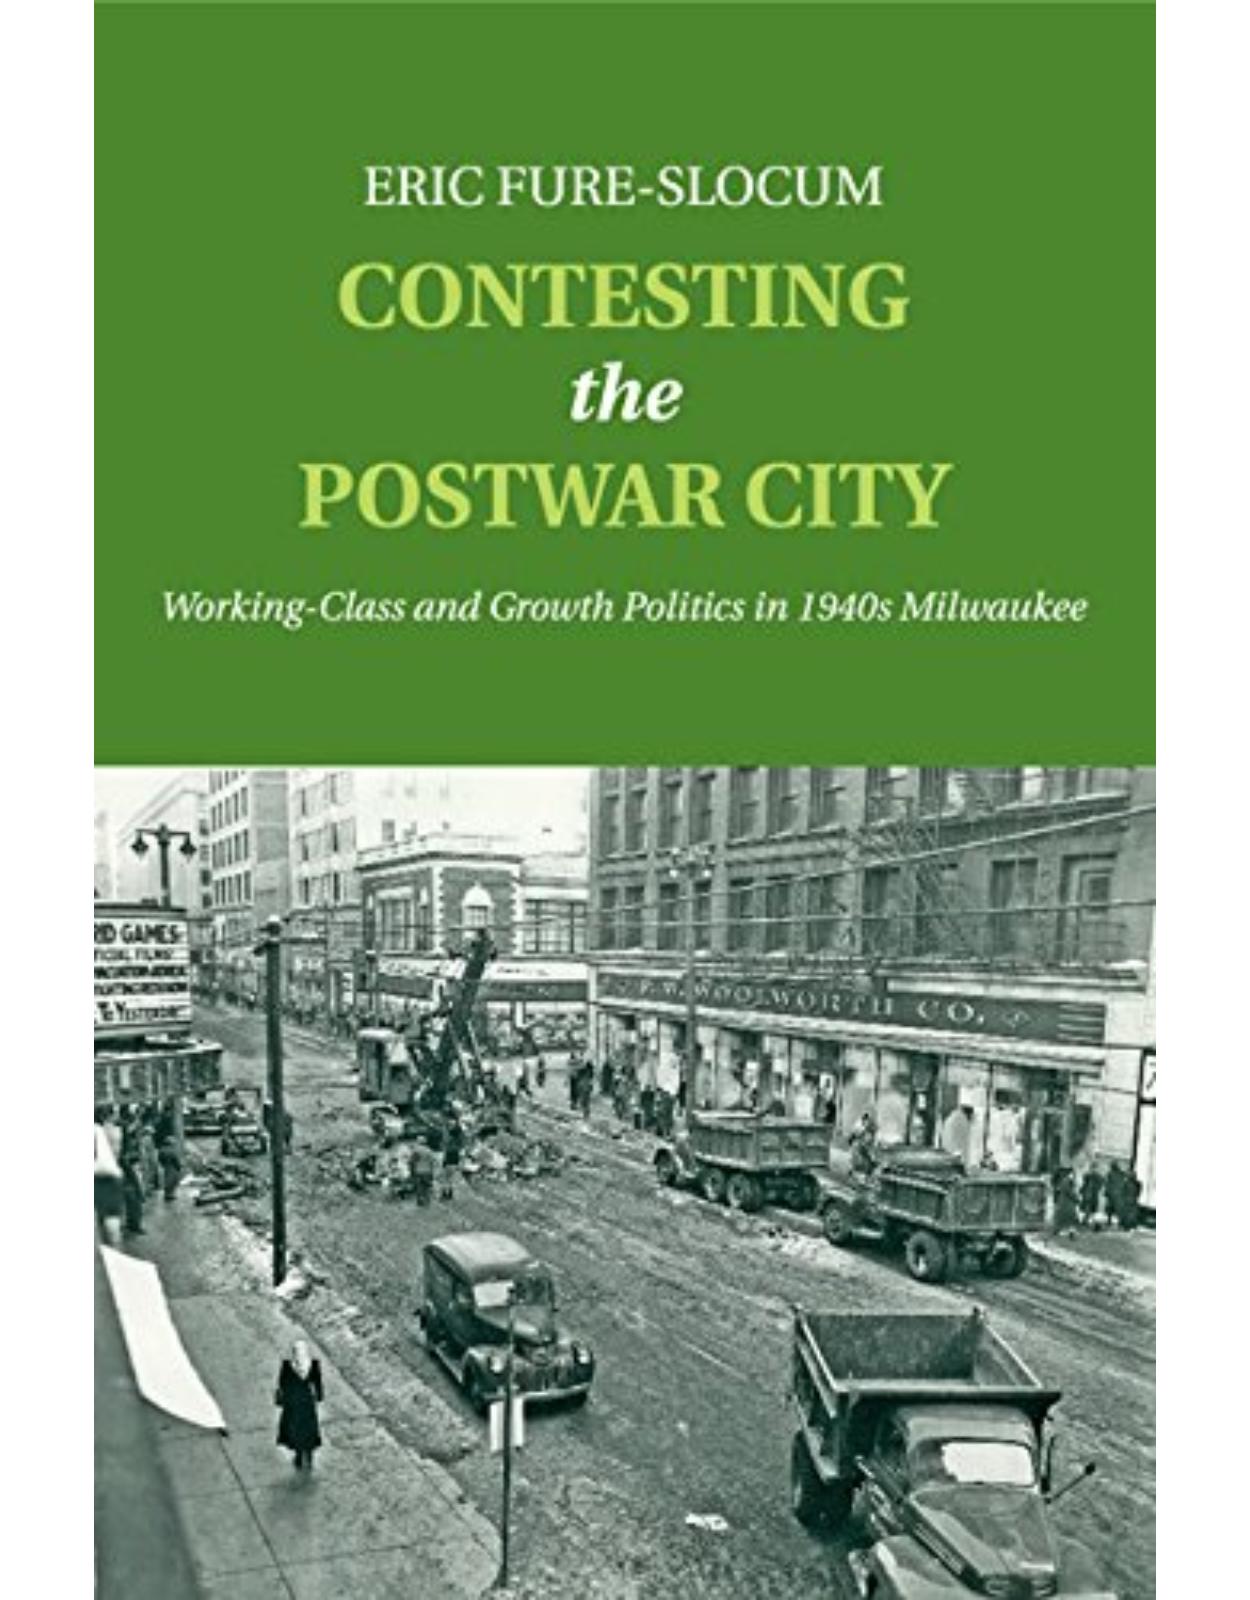 Contesting the Postwar City: Working-Class and Growth Politics in 1940s Milwaukee